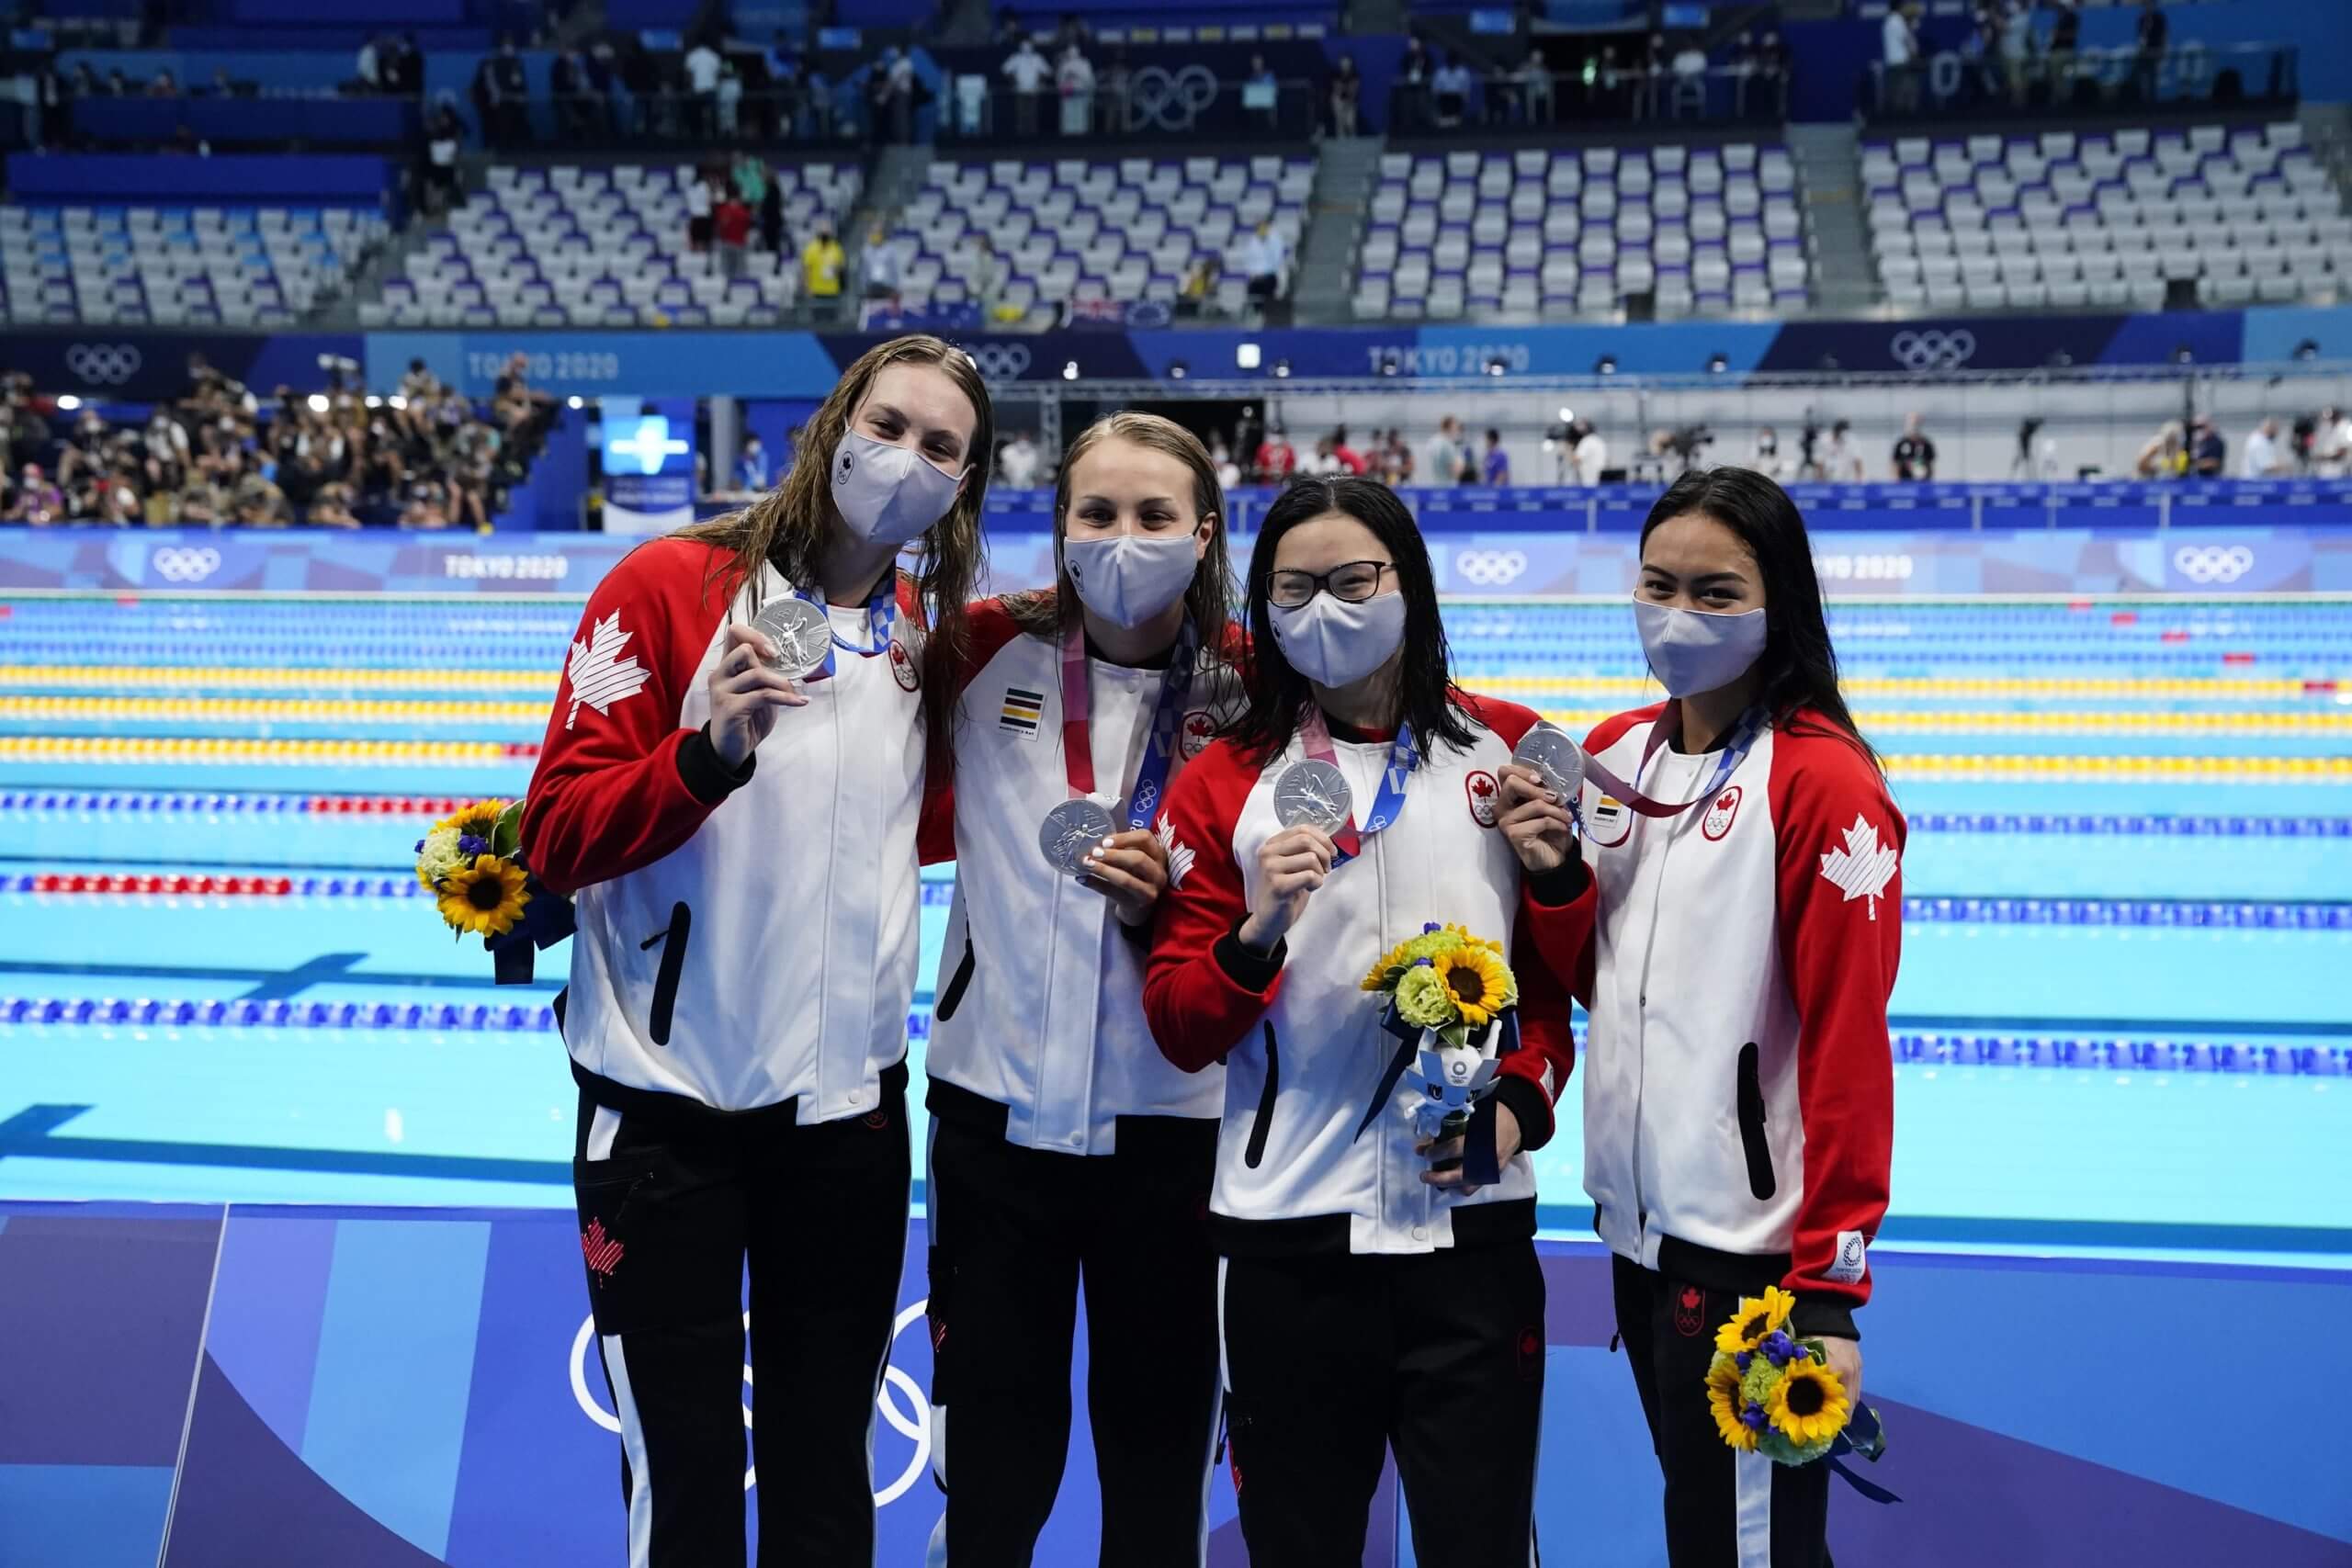 Jul 25, 2021; Tokyo, Japan; Canada team members Kayla Sanchez, Margaret Macneil, Rebecca Smith and Penny Oleksiak with their silver medals during the medals ceremony for the women's 4x100m freestyle relay during the Tokyo 2020 Olympic Summer Games at Tokyo Aquatics Centre. Mandatory Credit: Rob Schumacher-USA TODAY Network